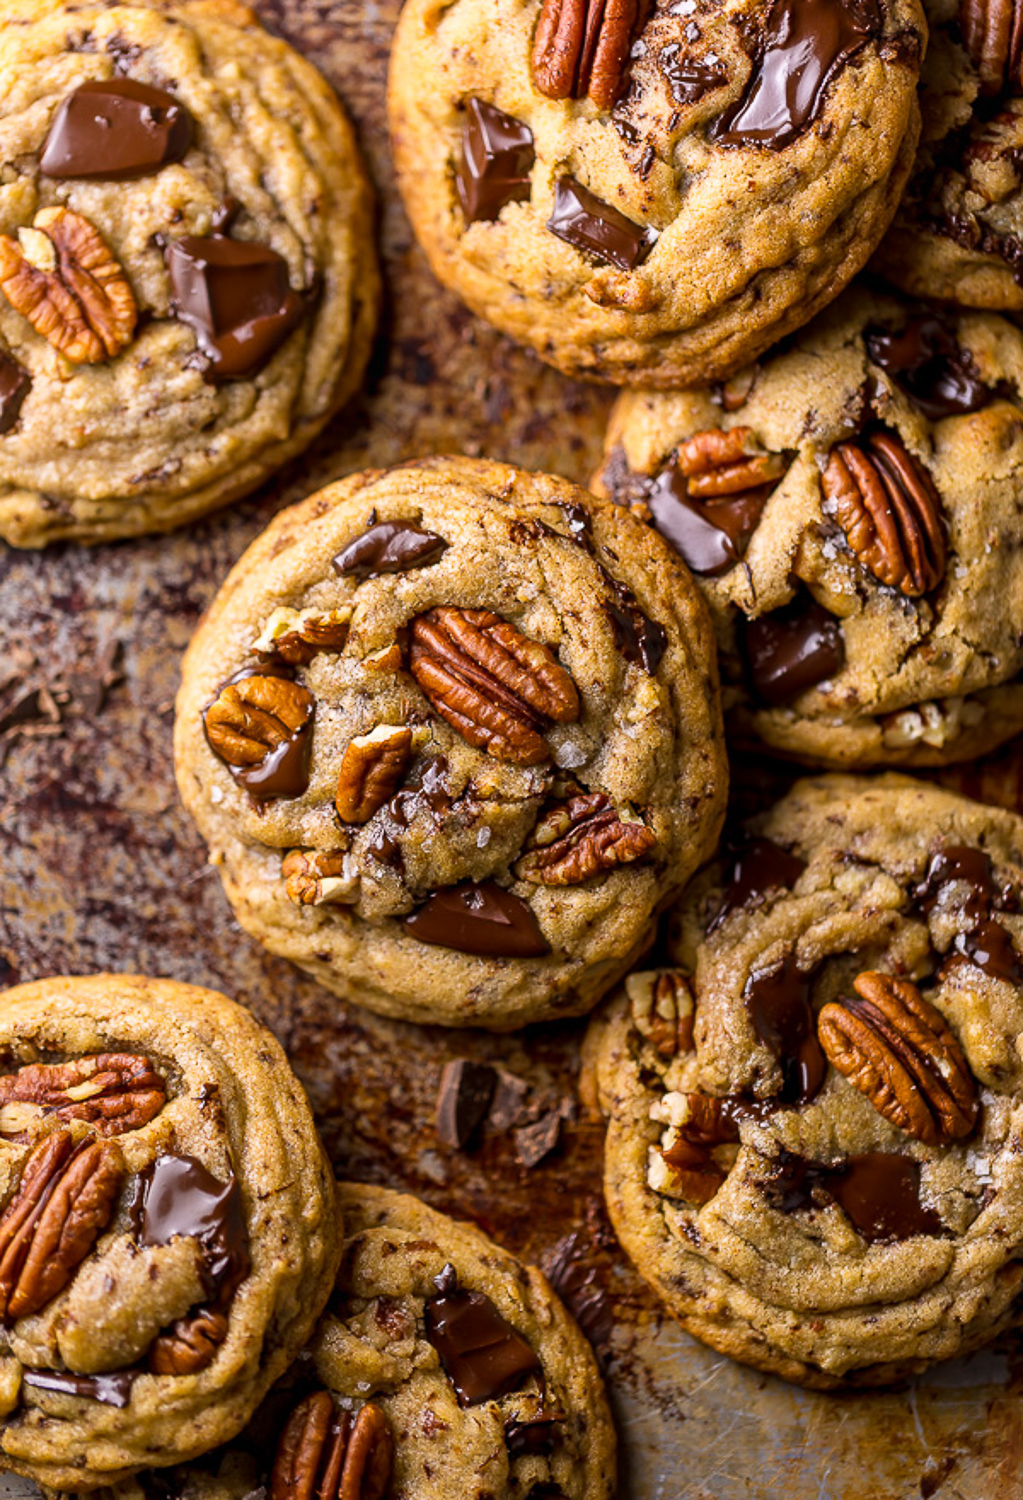 19 perfect pecan recipes you'll want to make over and over again this season!